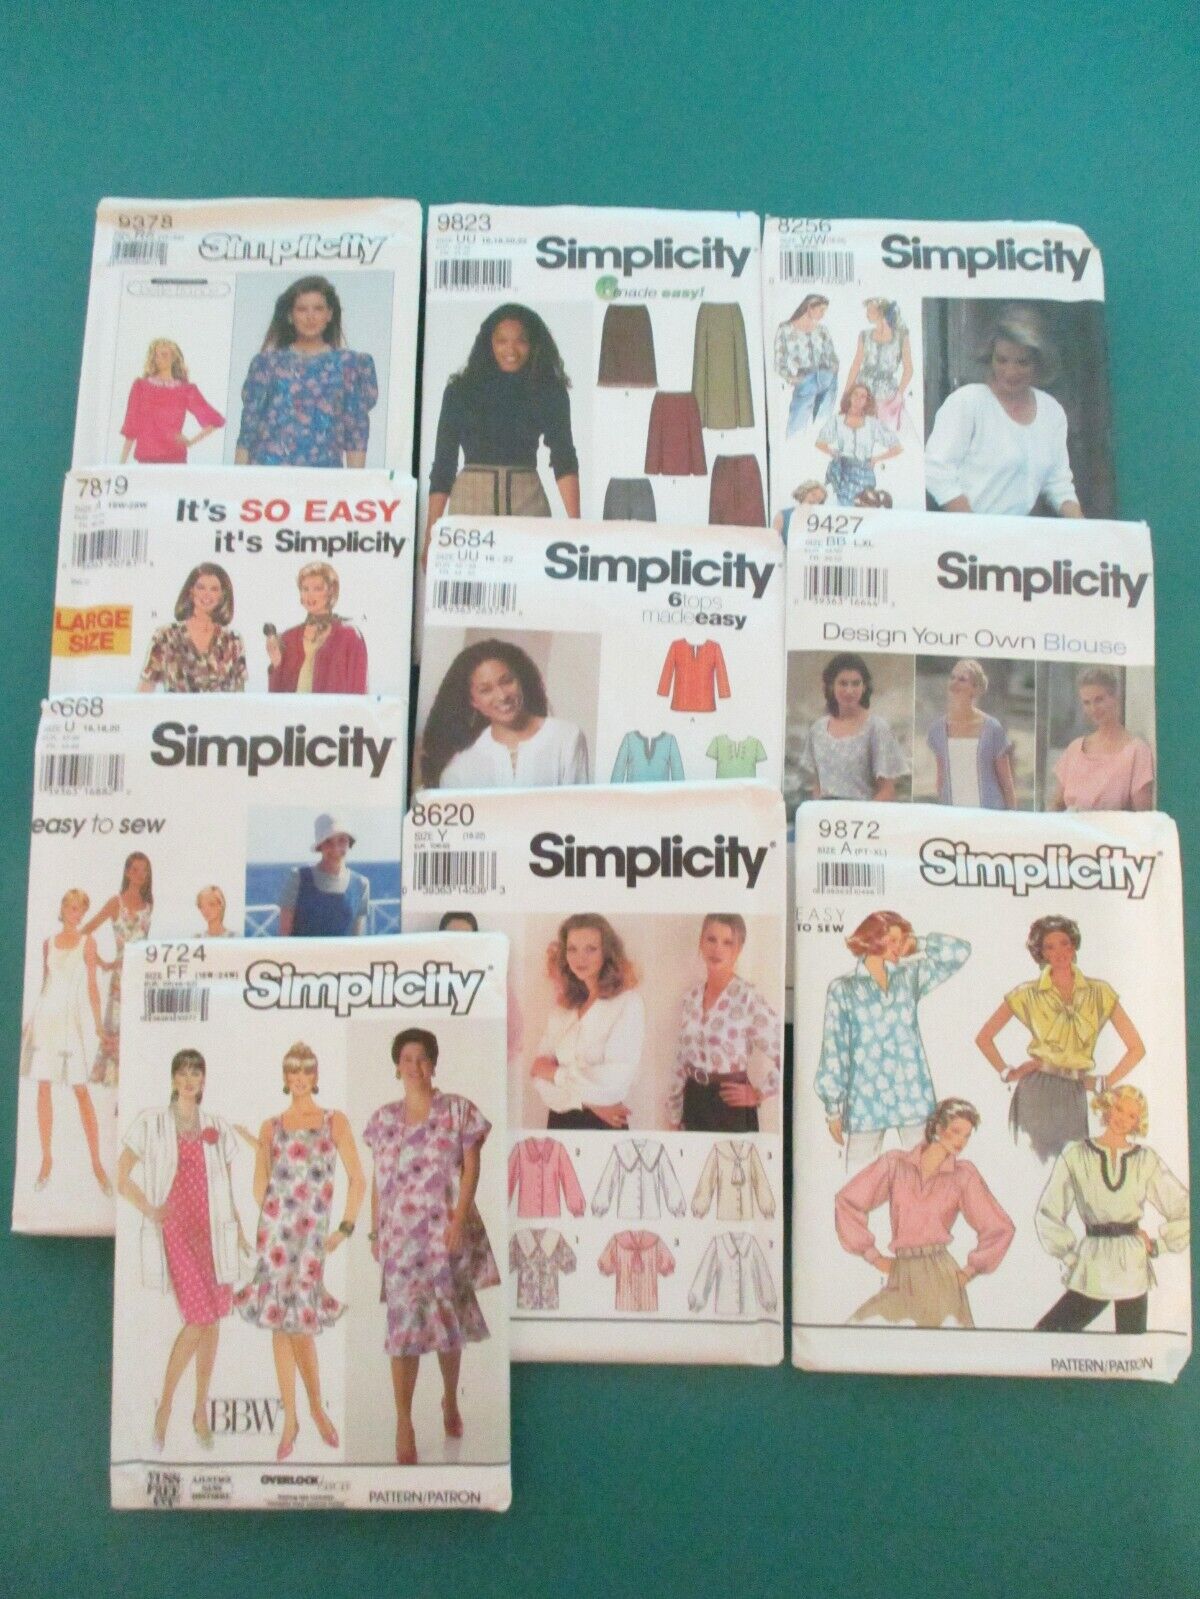 Huge Lot 10 Uncut Simplicity Women's Clothing Sewing Patterns Large Sizes